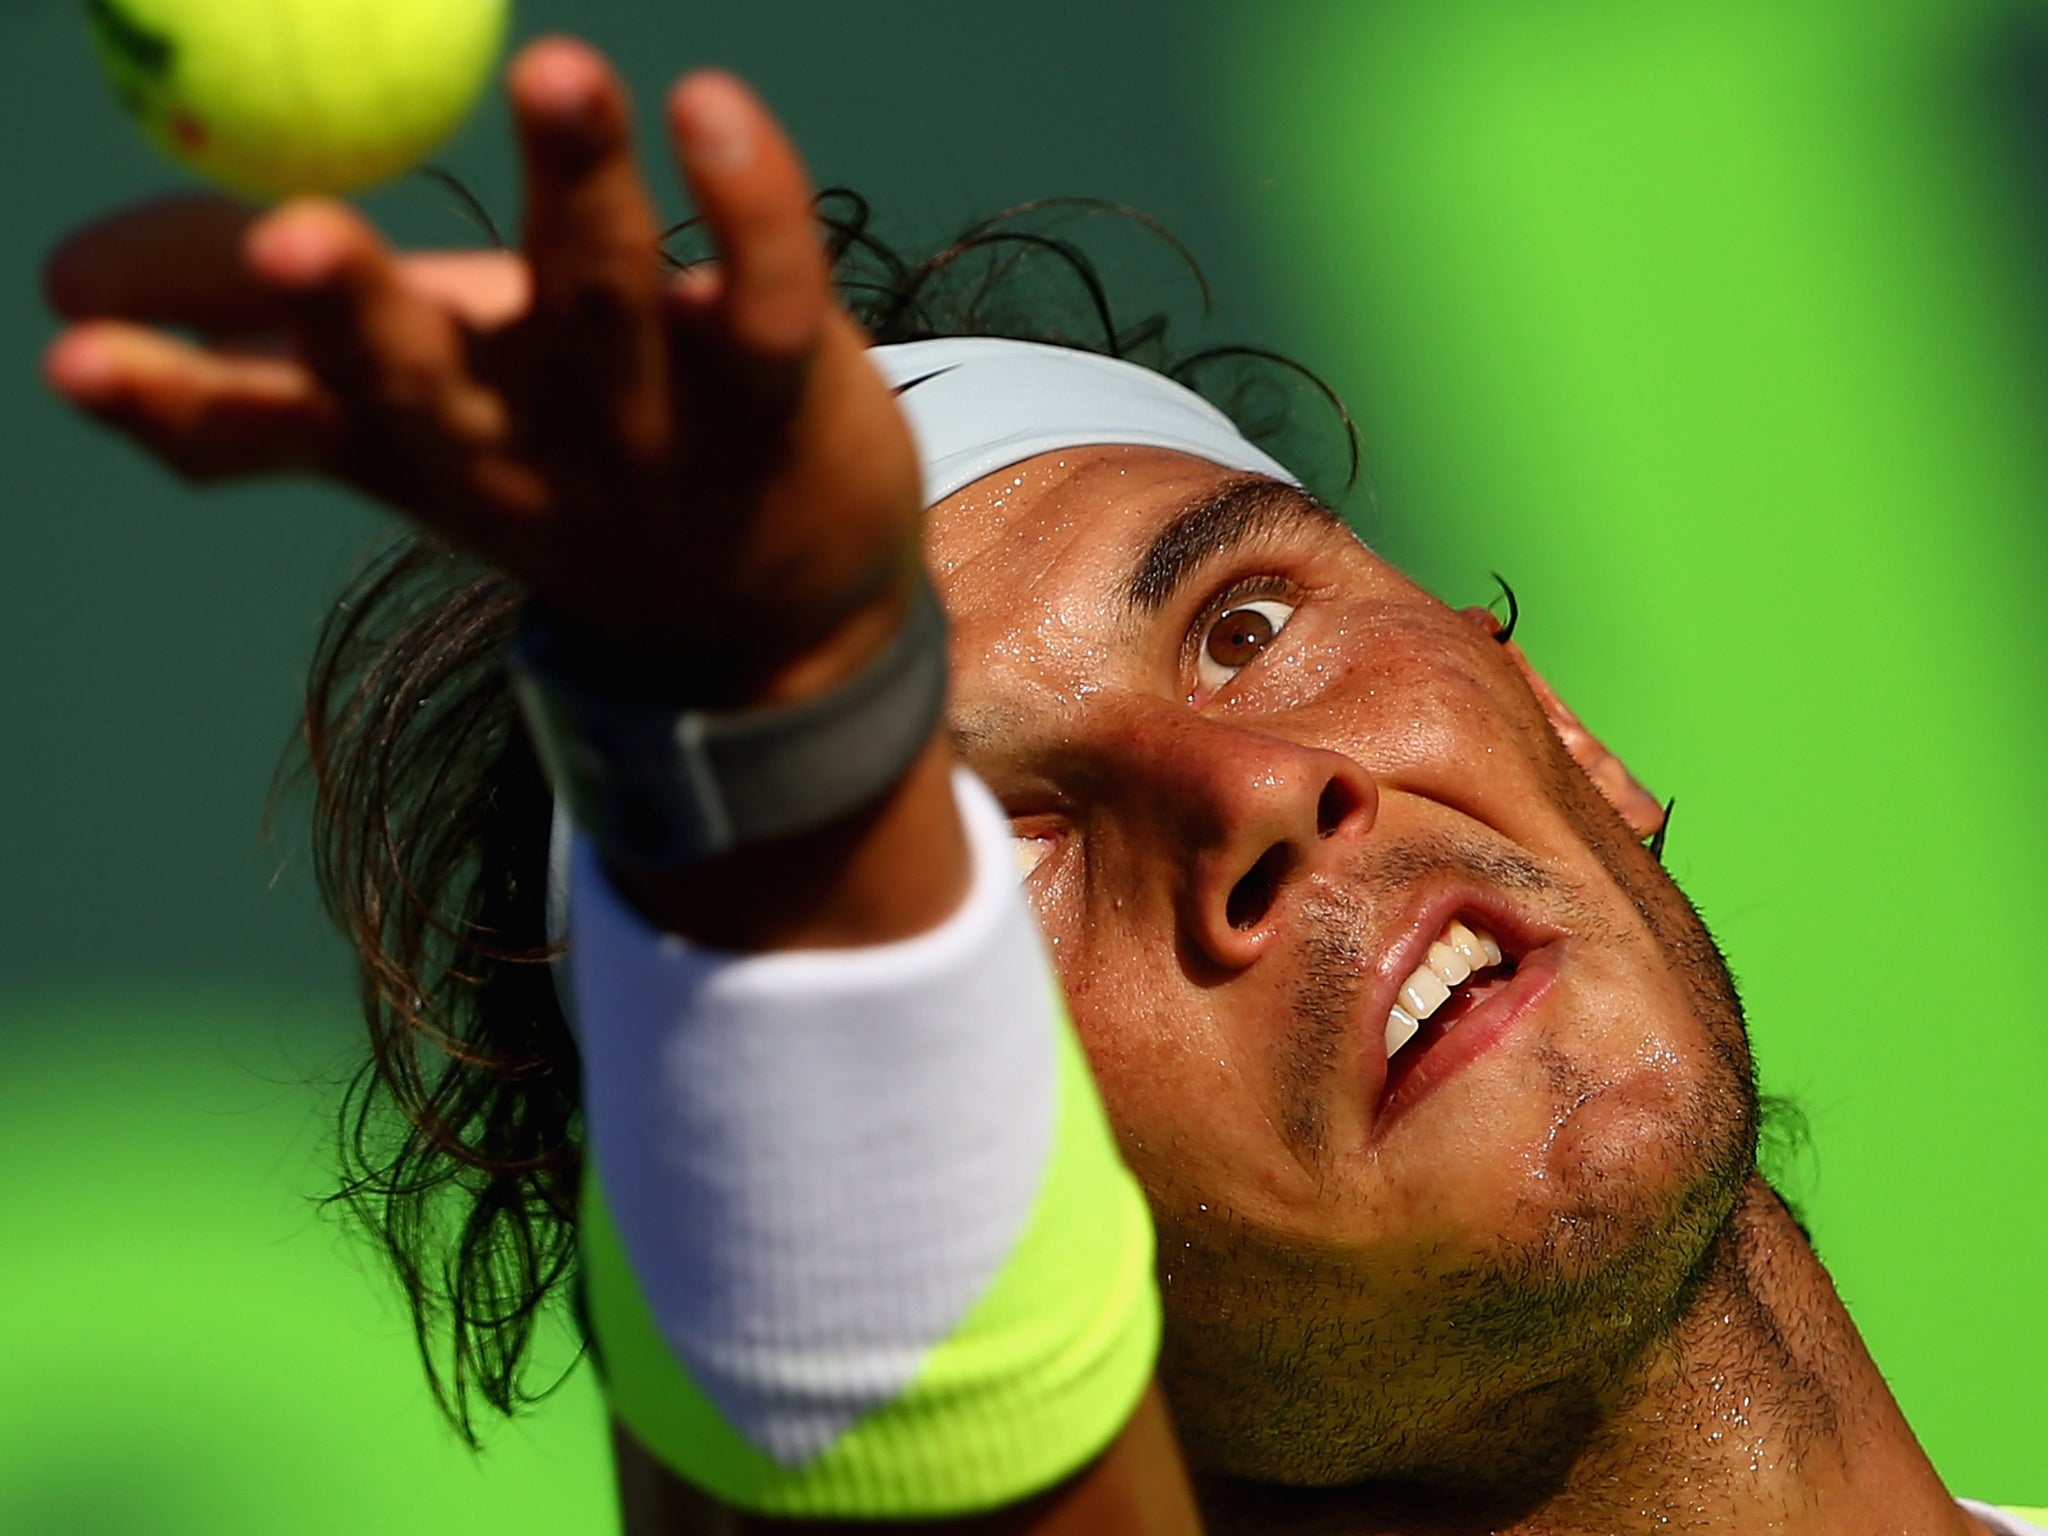 Rafael Nadal has a cold shower before matches, allowing him to feel his “power and resilience grow” (Getty)